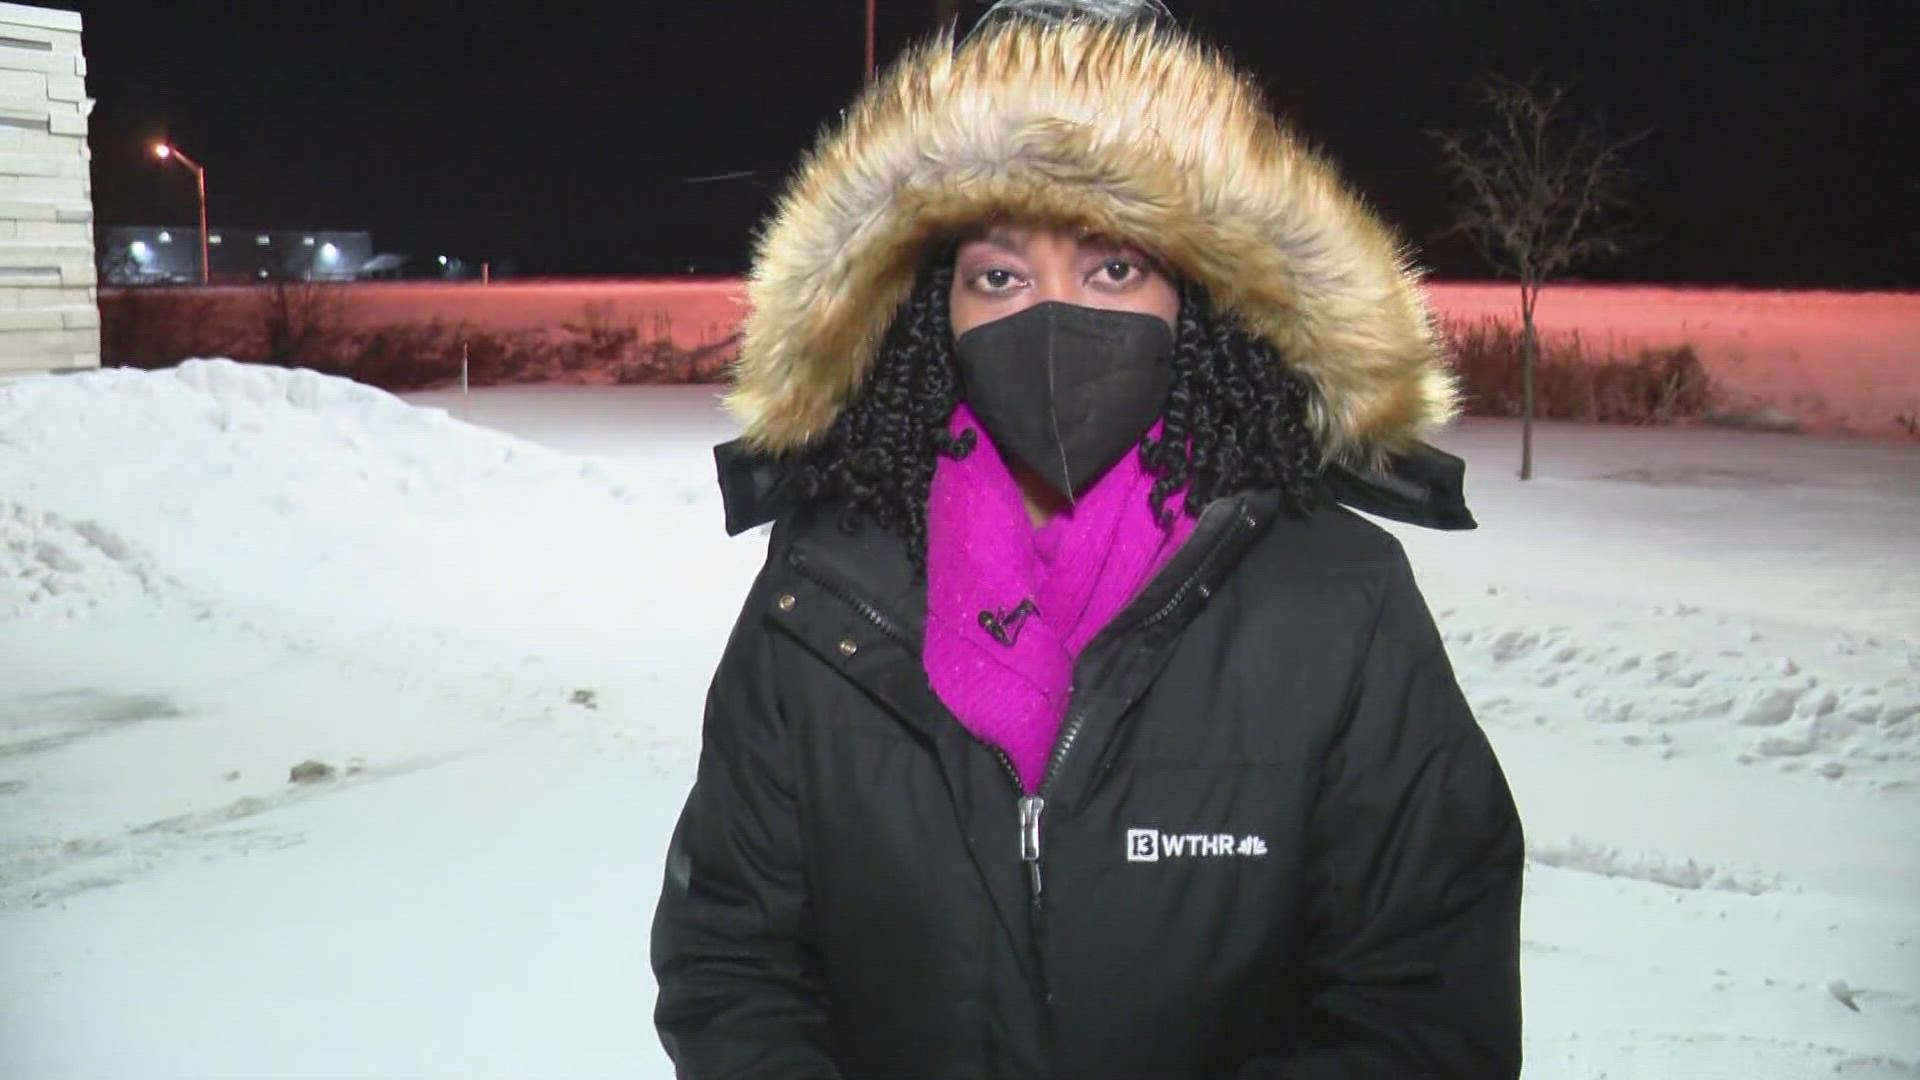 13News reporter Karen Campbell has the latest on conditions in Franklin at 4 a.m. Friday.